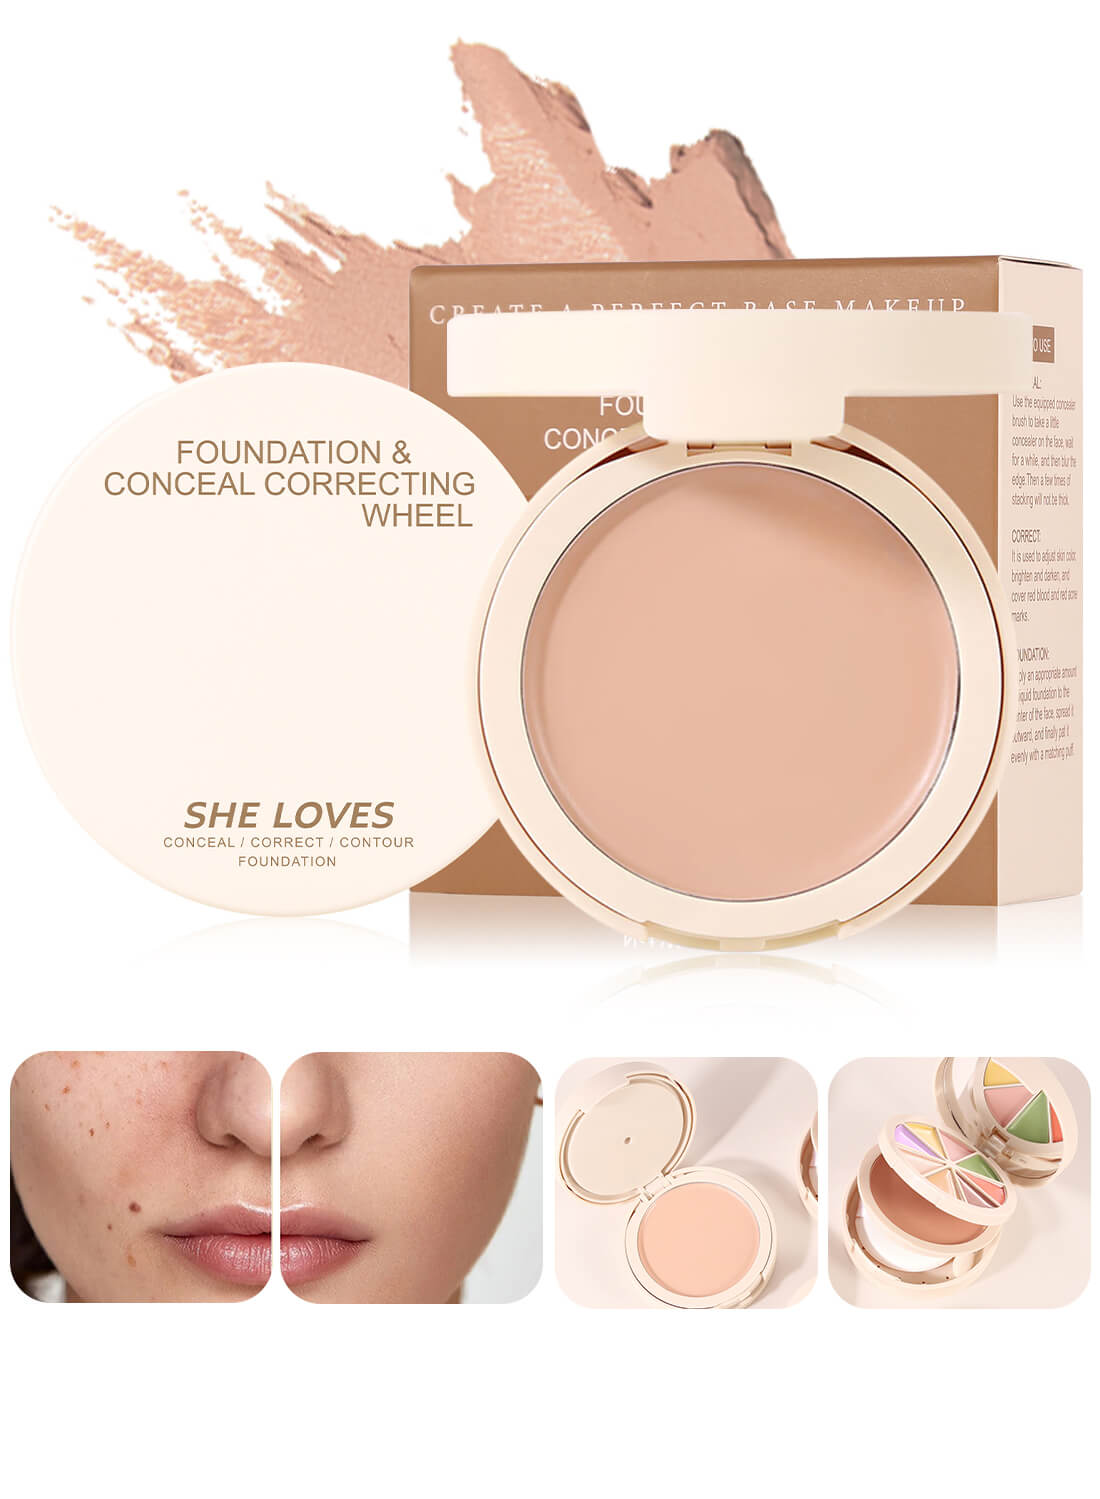 She Loves Foundation and Conceal Correcting Wheel